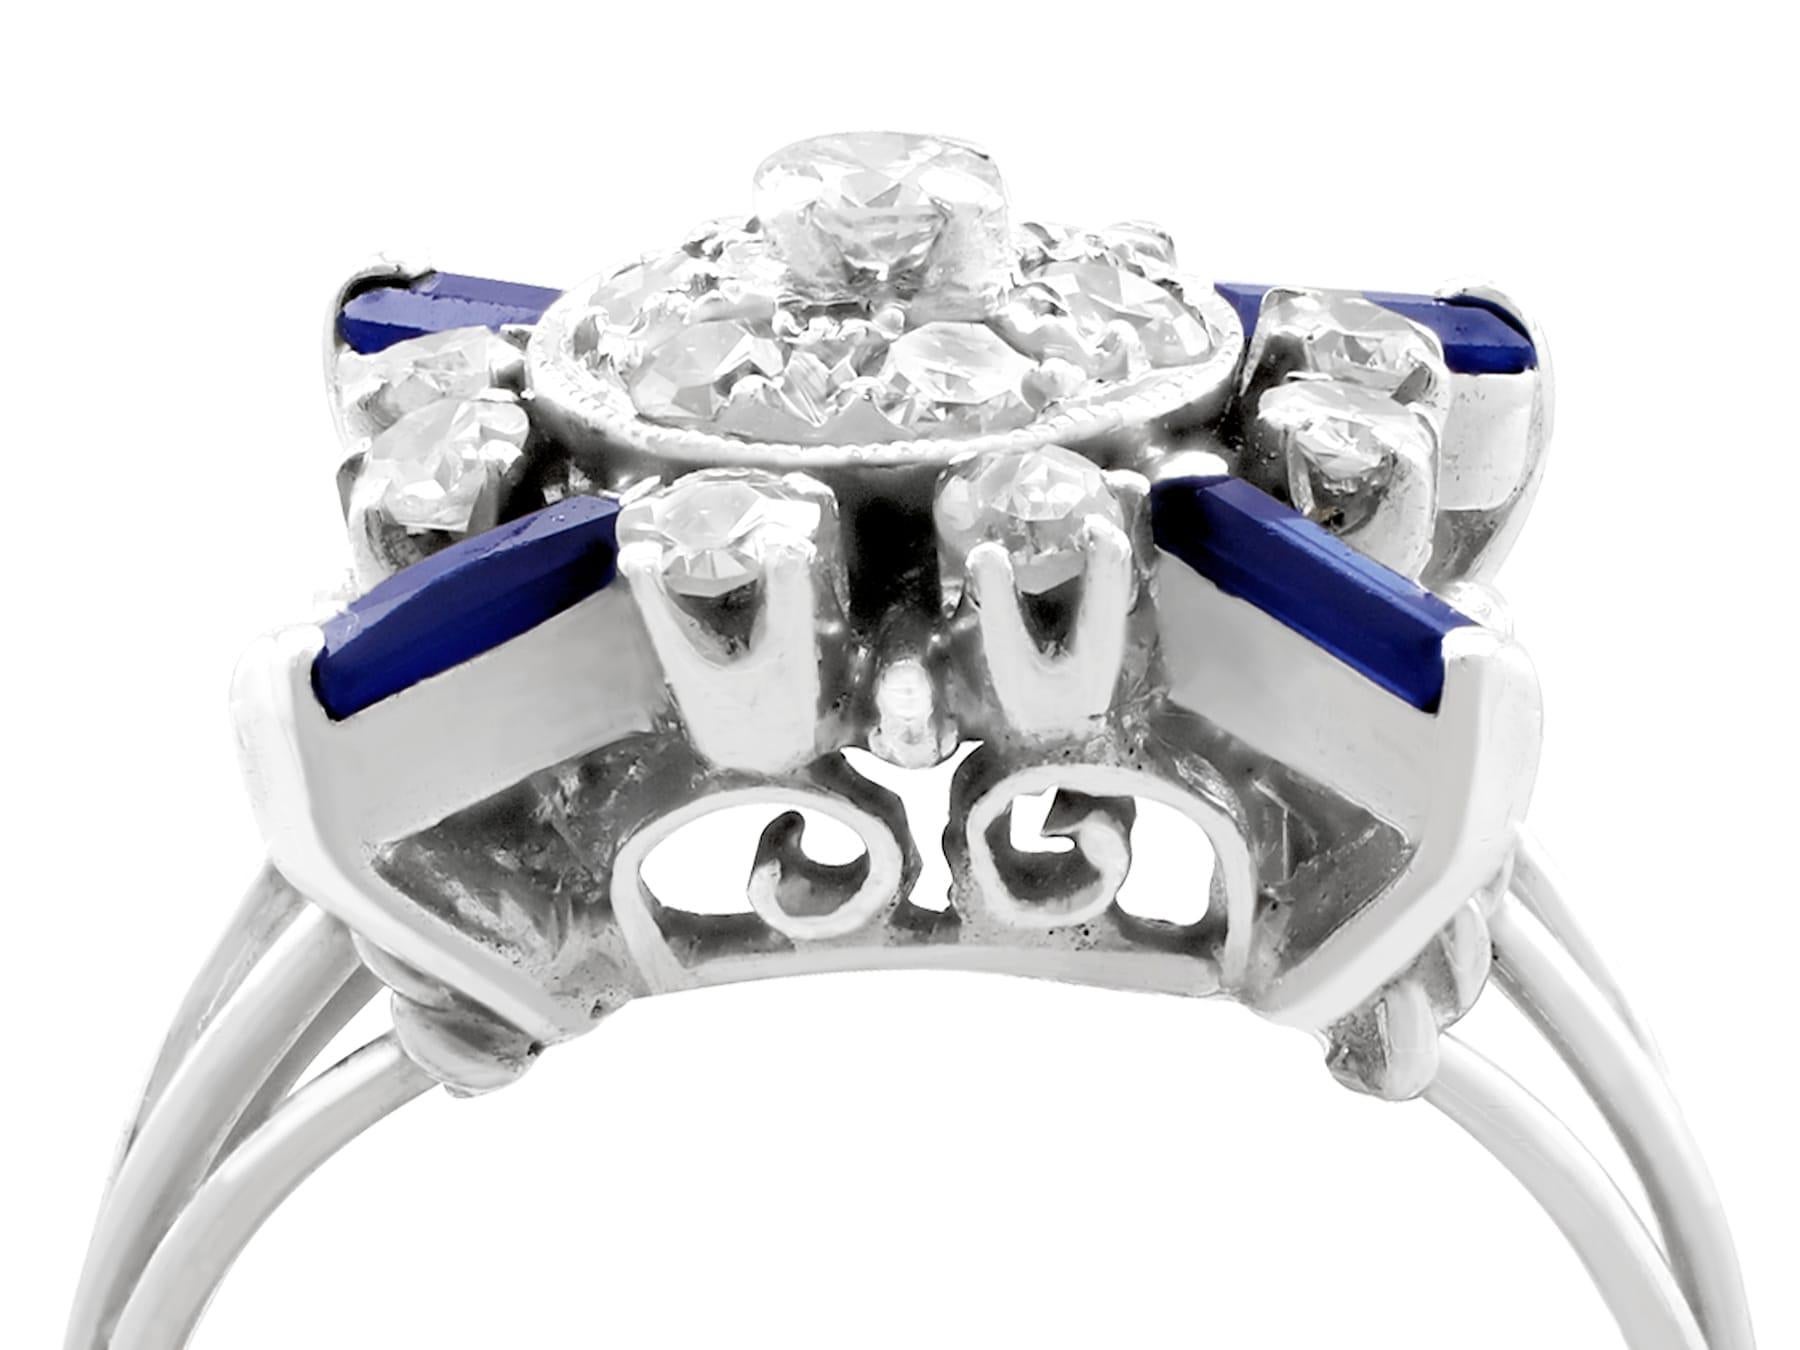 An impressive antique Art Deco 0.58 carat sapphire and 0.46 carat diamond, platinum cocktail ring; part of our diverse antique jewelry and estate jewelry collections.

This stunning, fine and impressive antique sapphire and diamond ring has been